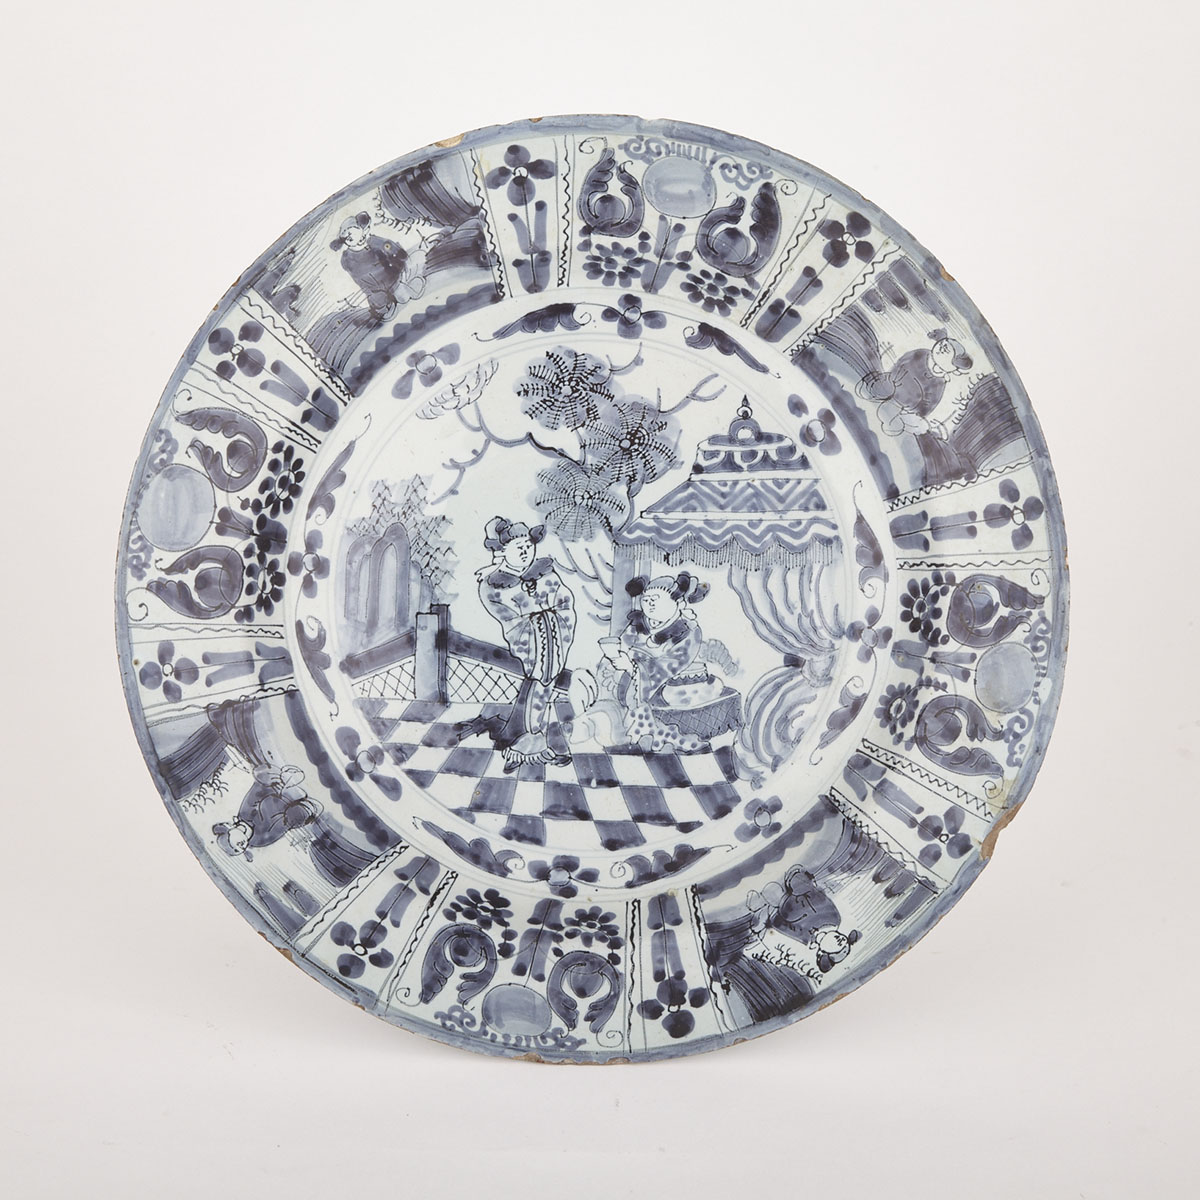 Delft Kraak-Style Charger, 18th century